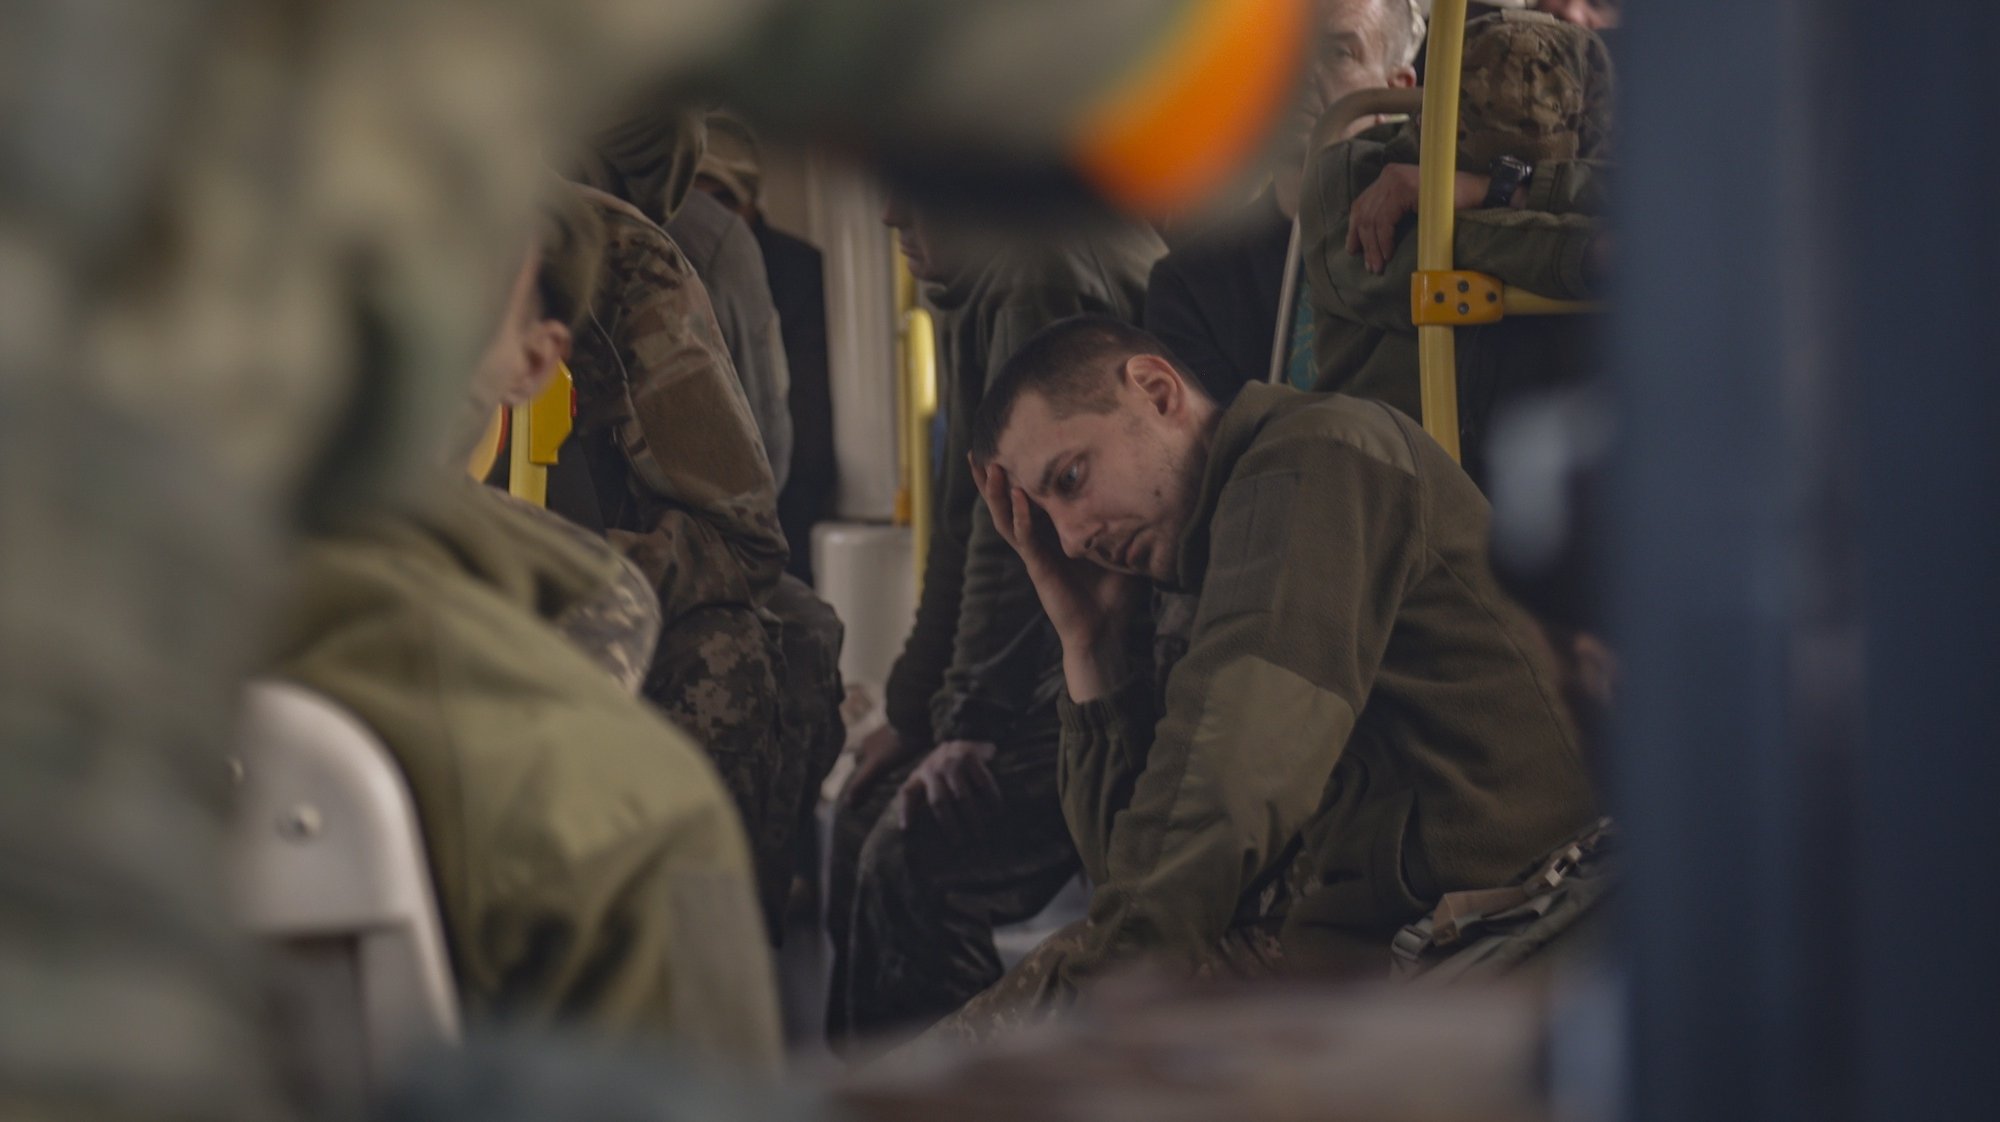 epa09953866 Ukrainian servicemen sitting in a bus as they are being evacuated from the besieged Azovstal steel plant in Mariupol, Ukraine, 17 May 2022. A total of 265 Ukrainian militants, including 51 seriously wounded, have laid down arms and surrendered to Russian forces, the Russian Ministry of Defence said on 17 May 2022. Those in need of medical assistance were sent for treatment to a hospital in Novoazovsk, the ministry states further. Russian President Putin on 21 April 2022 ordered his Defence Minister to not storm but to blockade the plant where a number of Ukrainian fighters were holding out. On 24 February, Russian troops invaded Ukrainian territory starting a conflict that has provoked destruction and a humanitarian crisis. According to the UNHCR, more than six million refugees have fled Ukraine, and a further 7.7 million people have been displaced internally within Ukraine since.  EPA/ALESSANDRO GUERRA